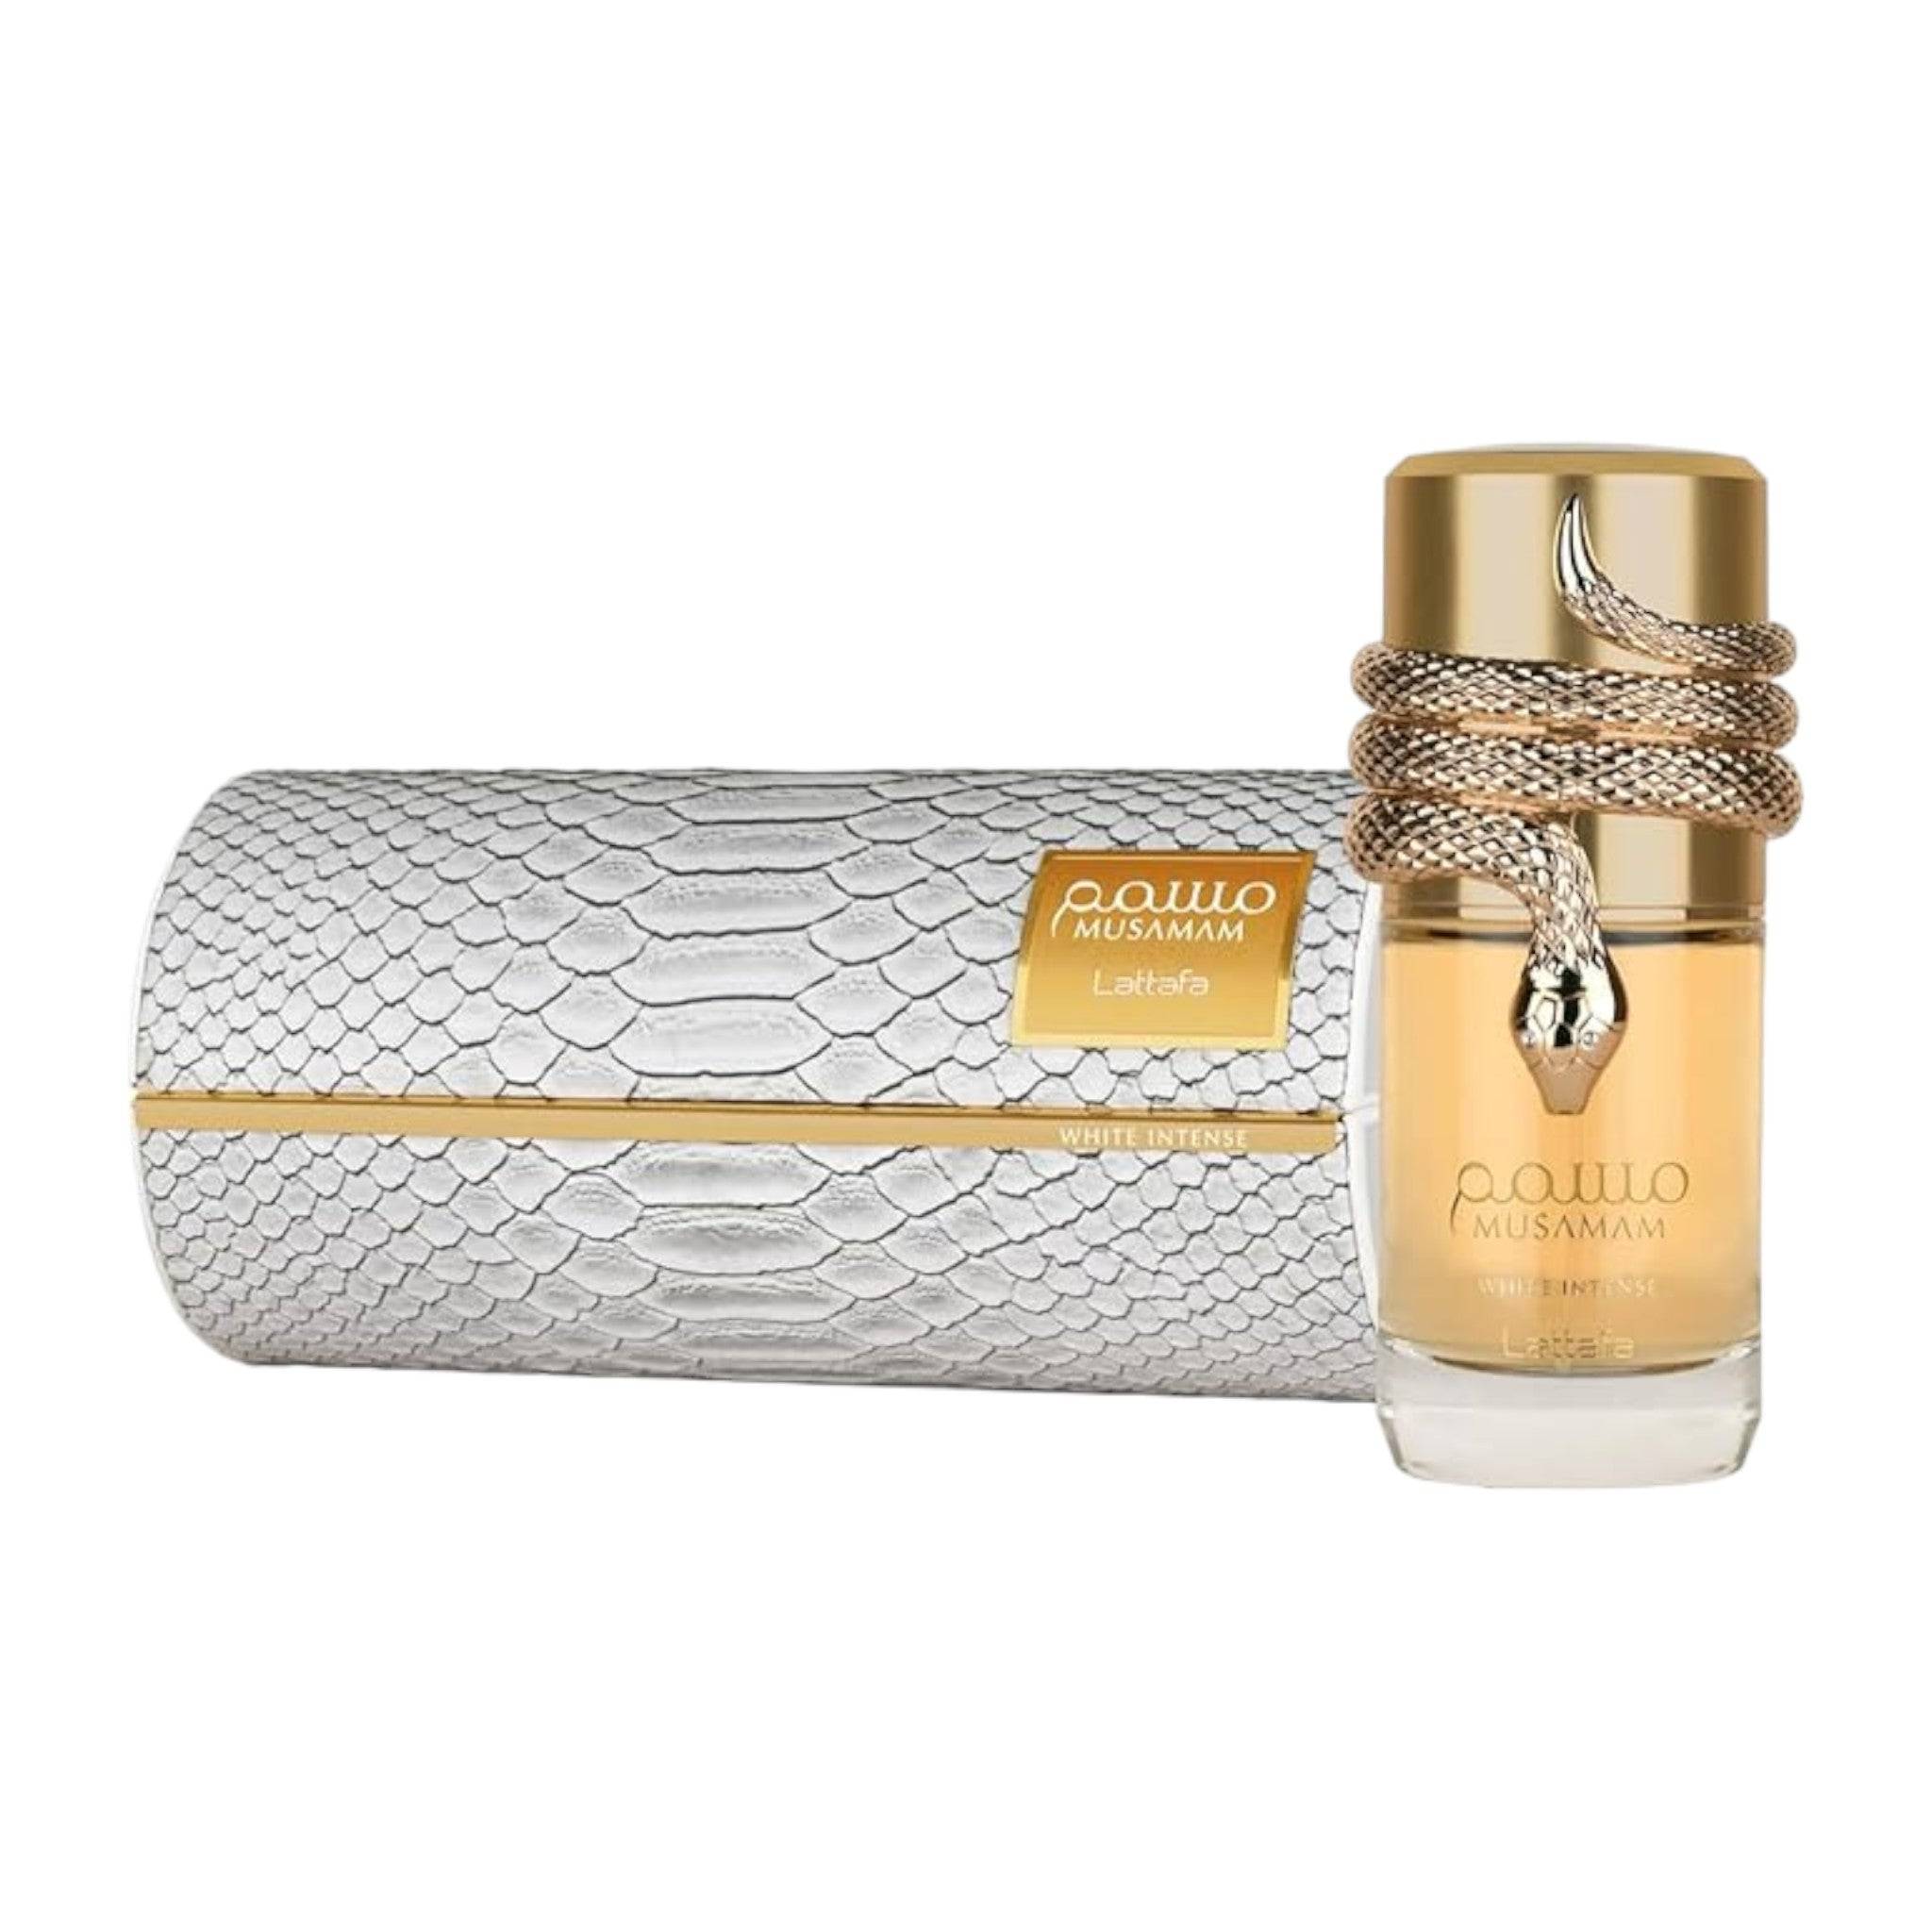 Musamam White Intense Perfume bottle by Lattafa, showcasing its elegant design and the sophisticated essence of bergamot, coconut, and sandalwood in a 100ml package.